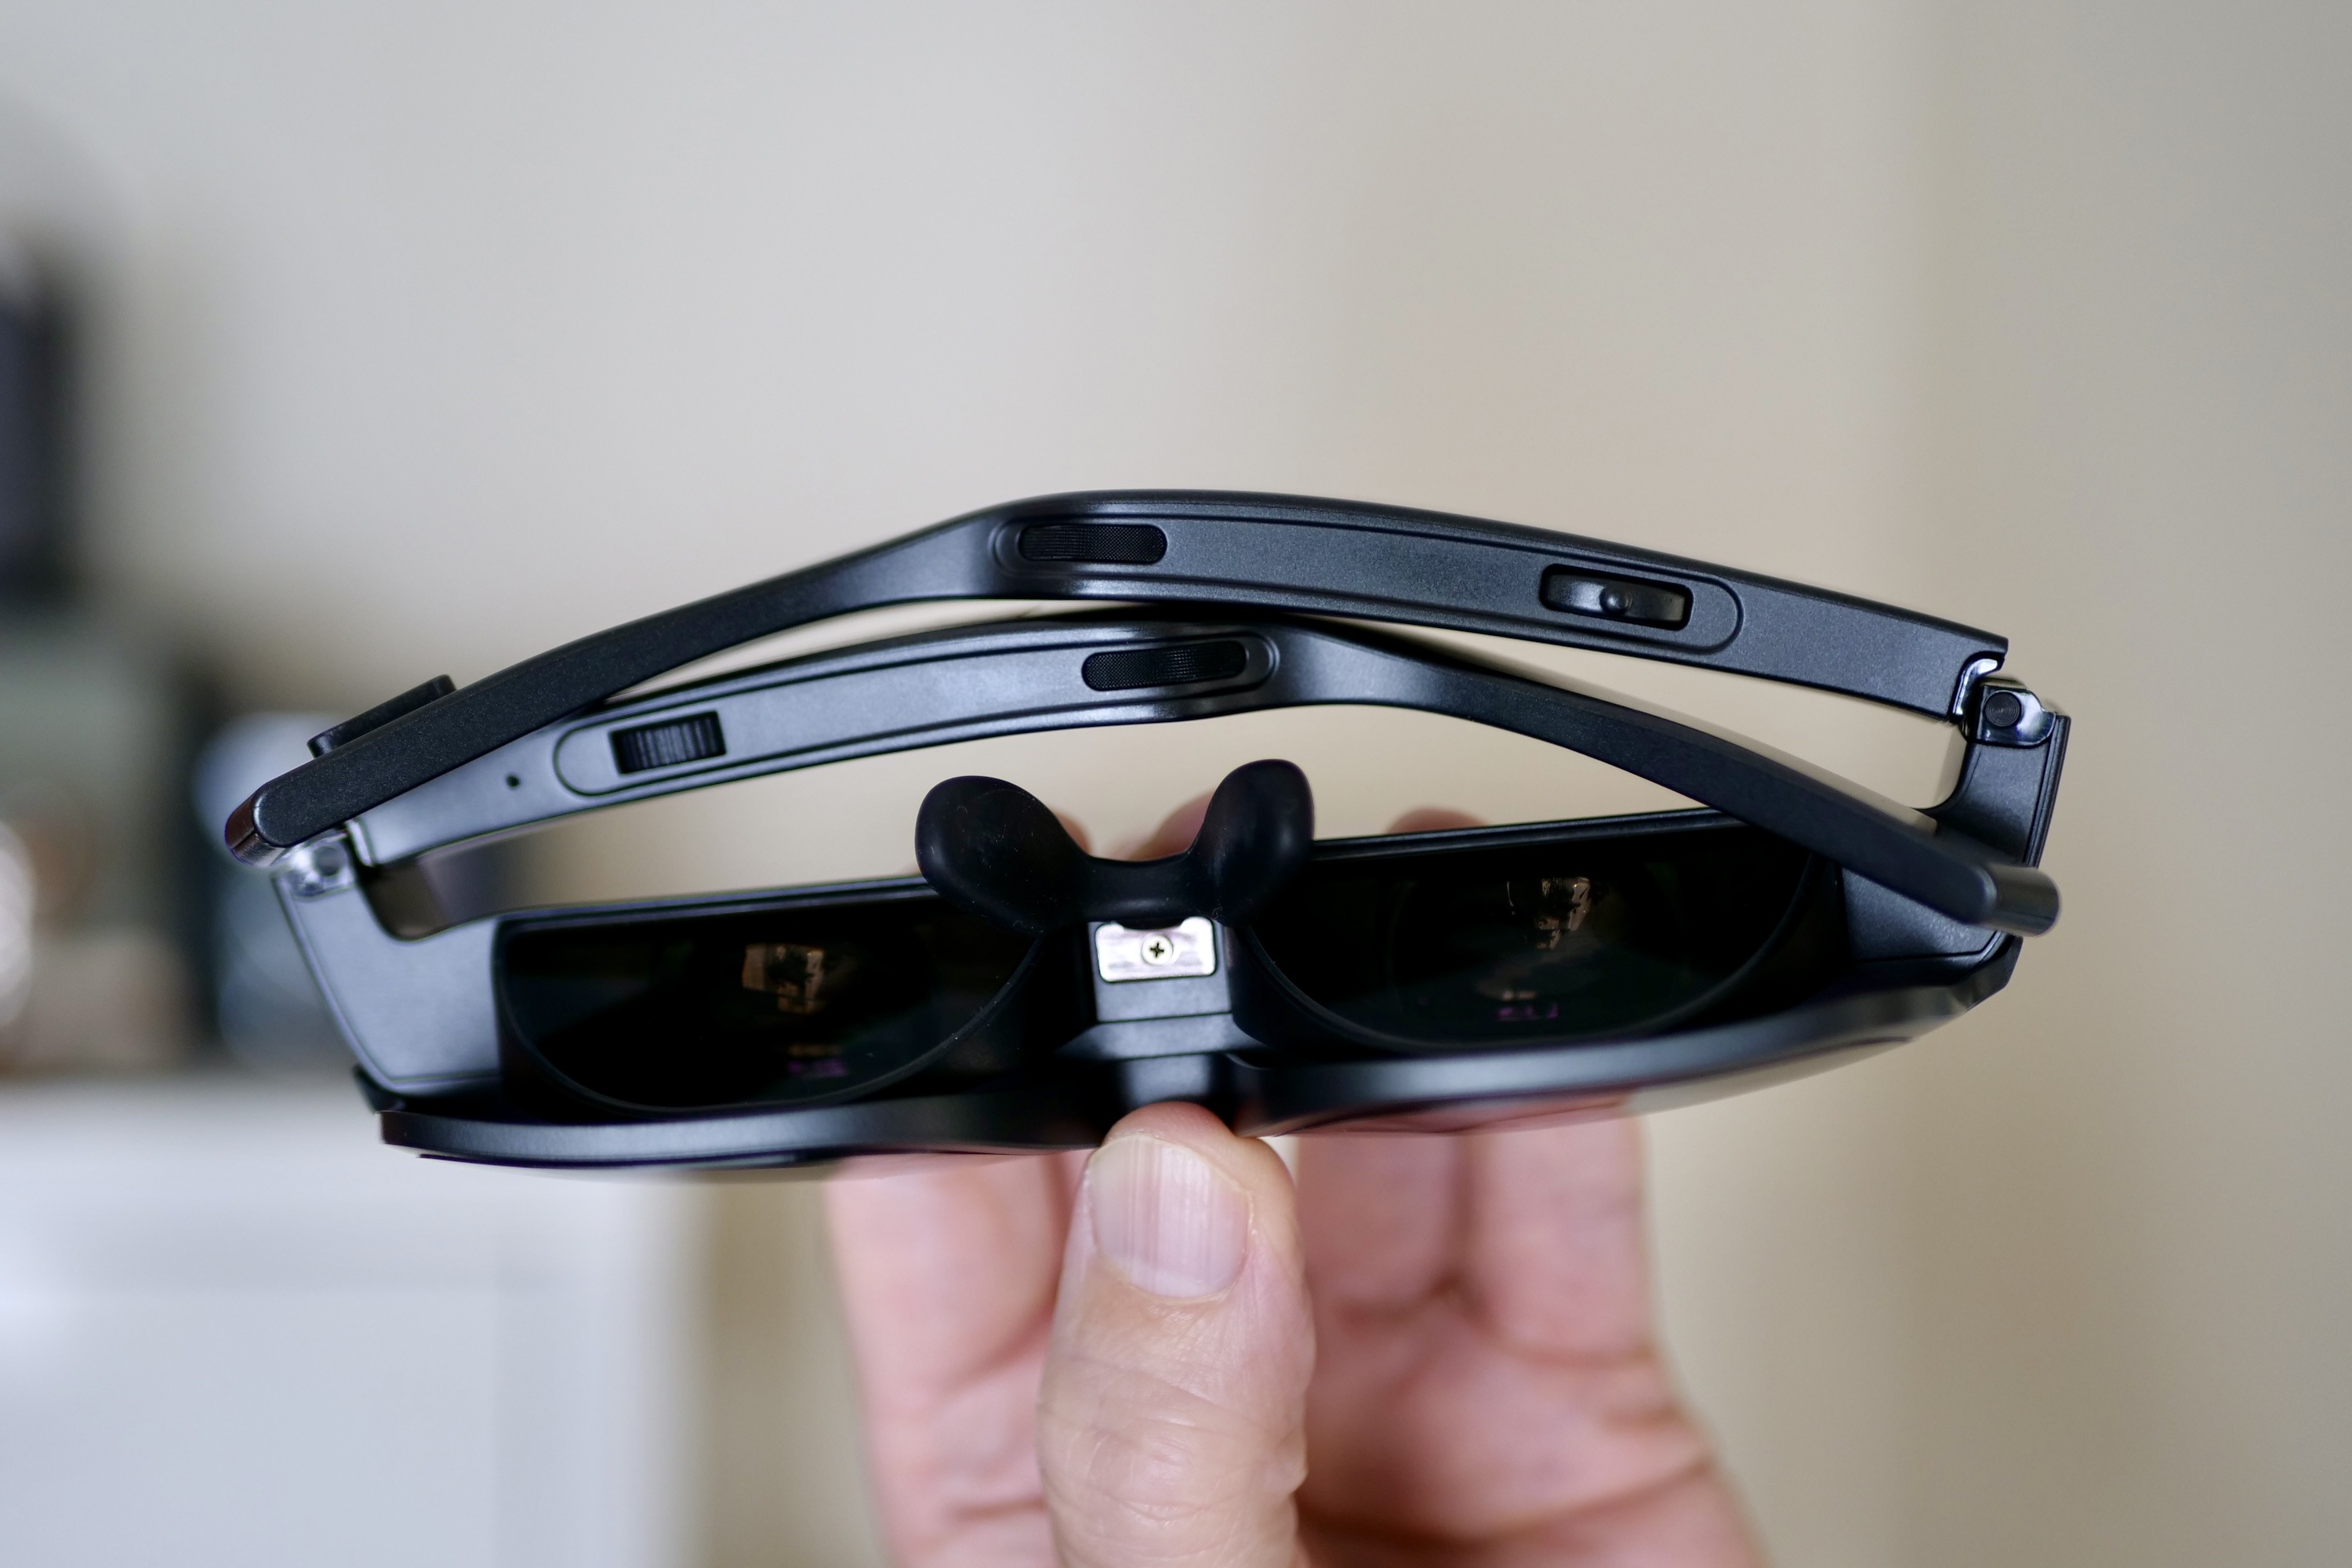 The TCL RayNeo Nxtwear S XR glasses's controls.